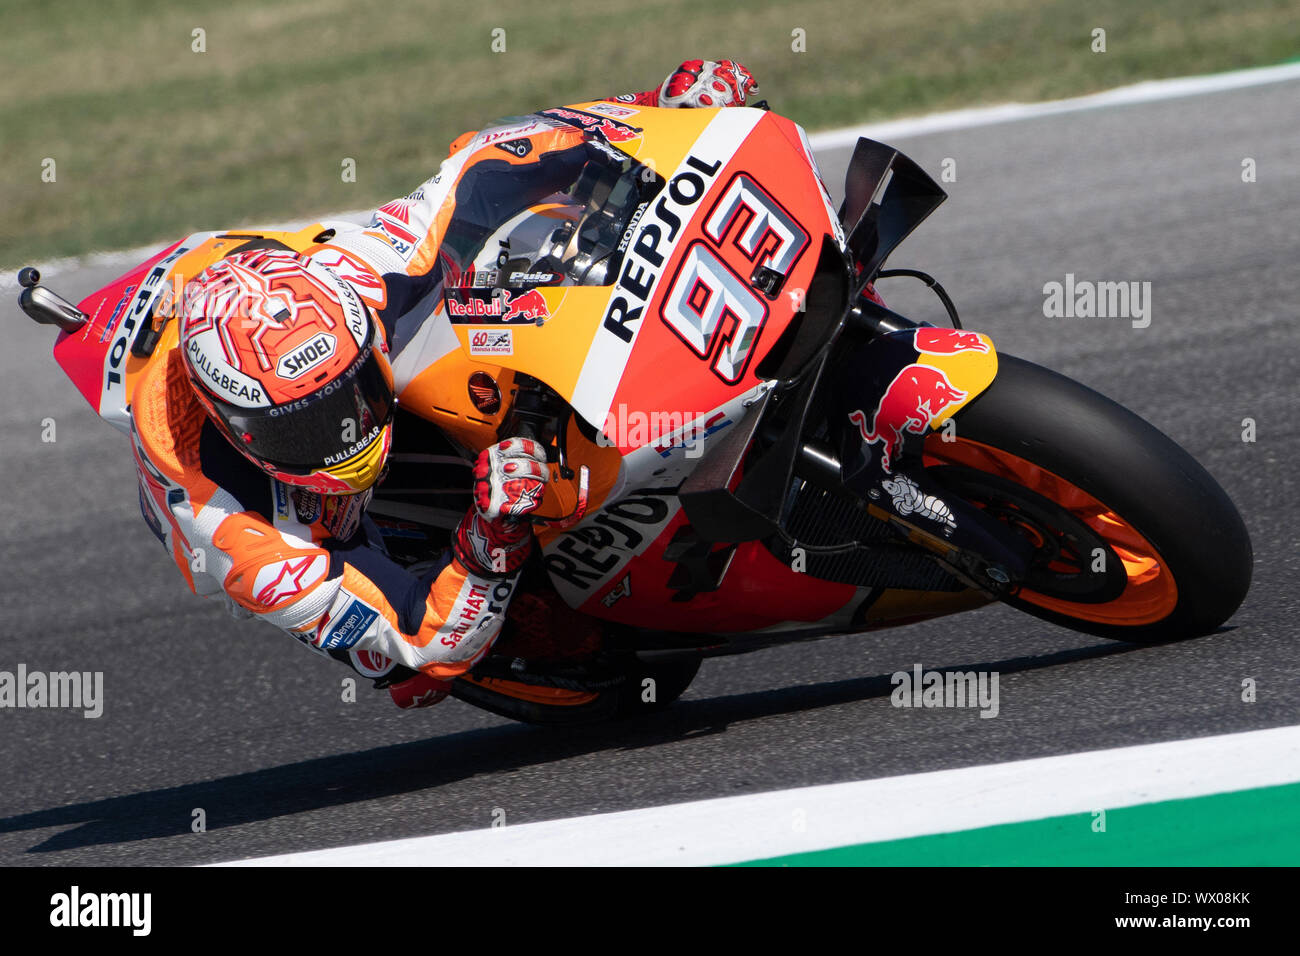 MARC MARQUEZ, SPANISH RIDER AND MOTOGP WORLD CHAMPION WITH NUMBER 93 FOR REPSOL HONDA TEAM  during Friday Free Practice (fp1-fp2) Of The Motogp Of San Stock Photo